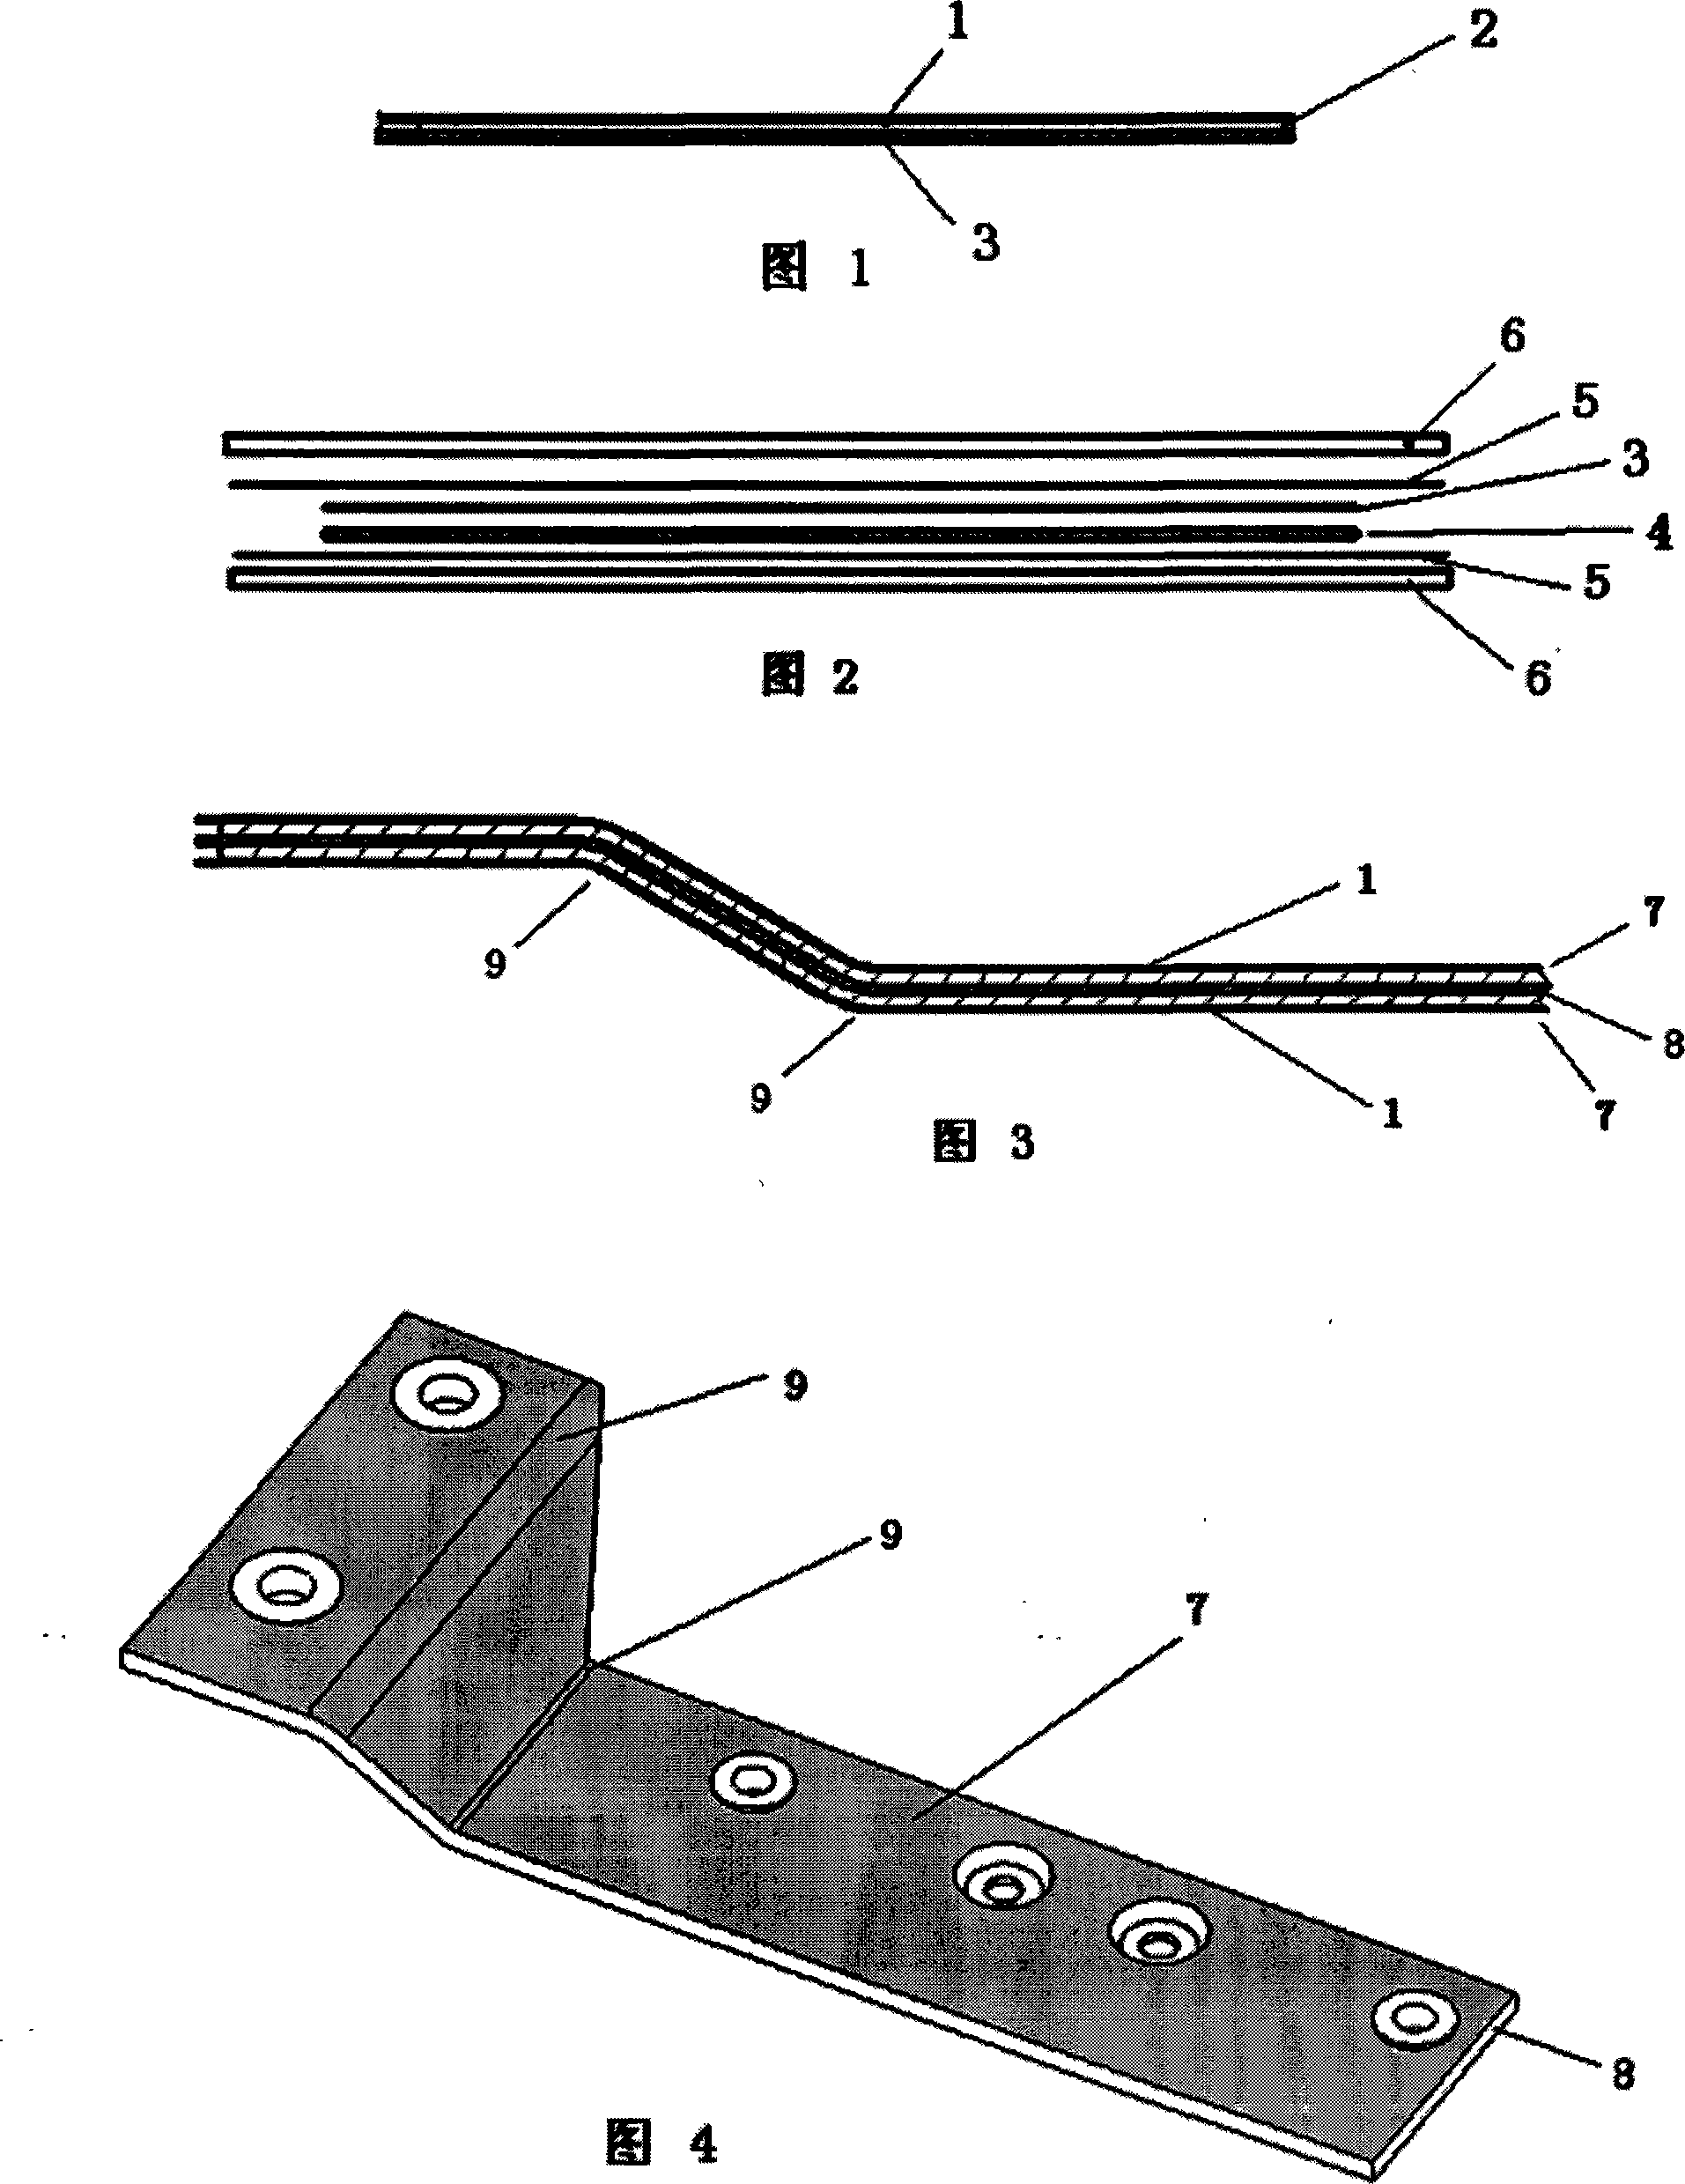 Composite insulating material and its processing method